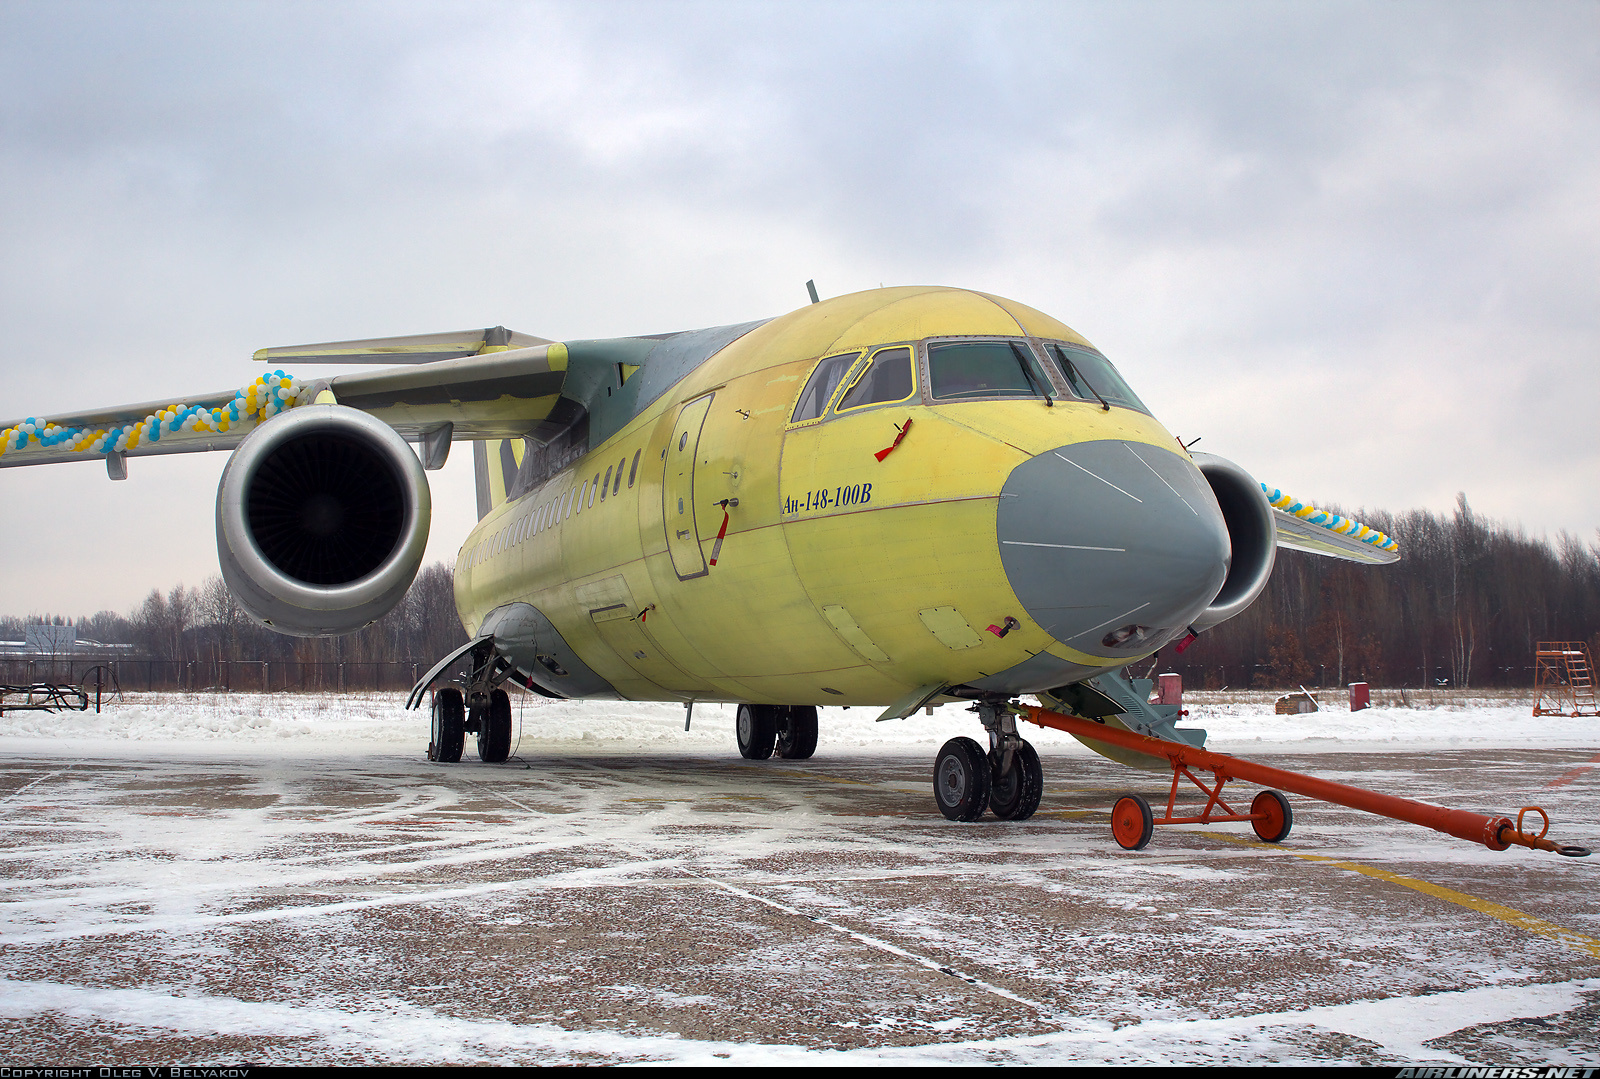 antonov-an-148-100b-untitled-aviation-photo-1844123-airliners